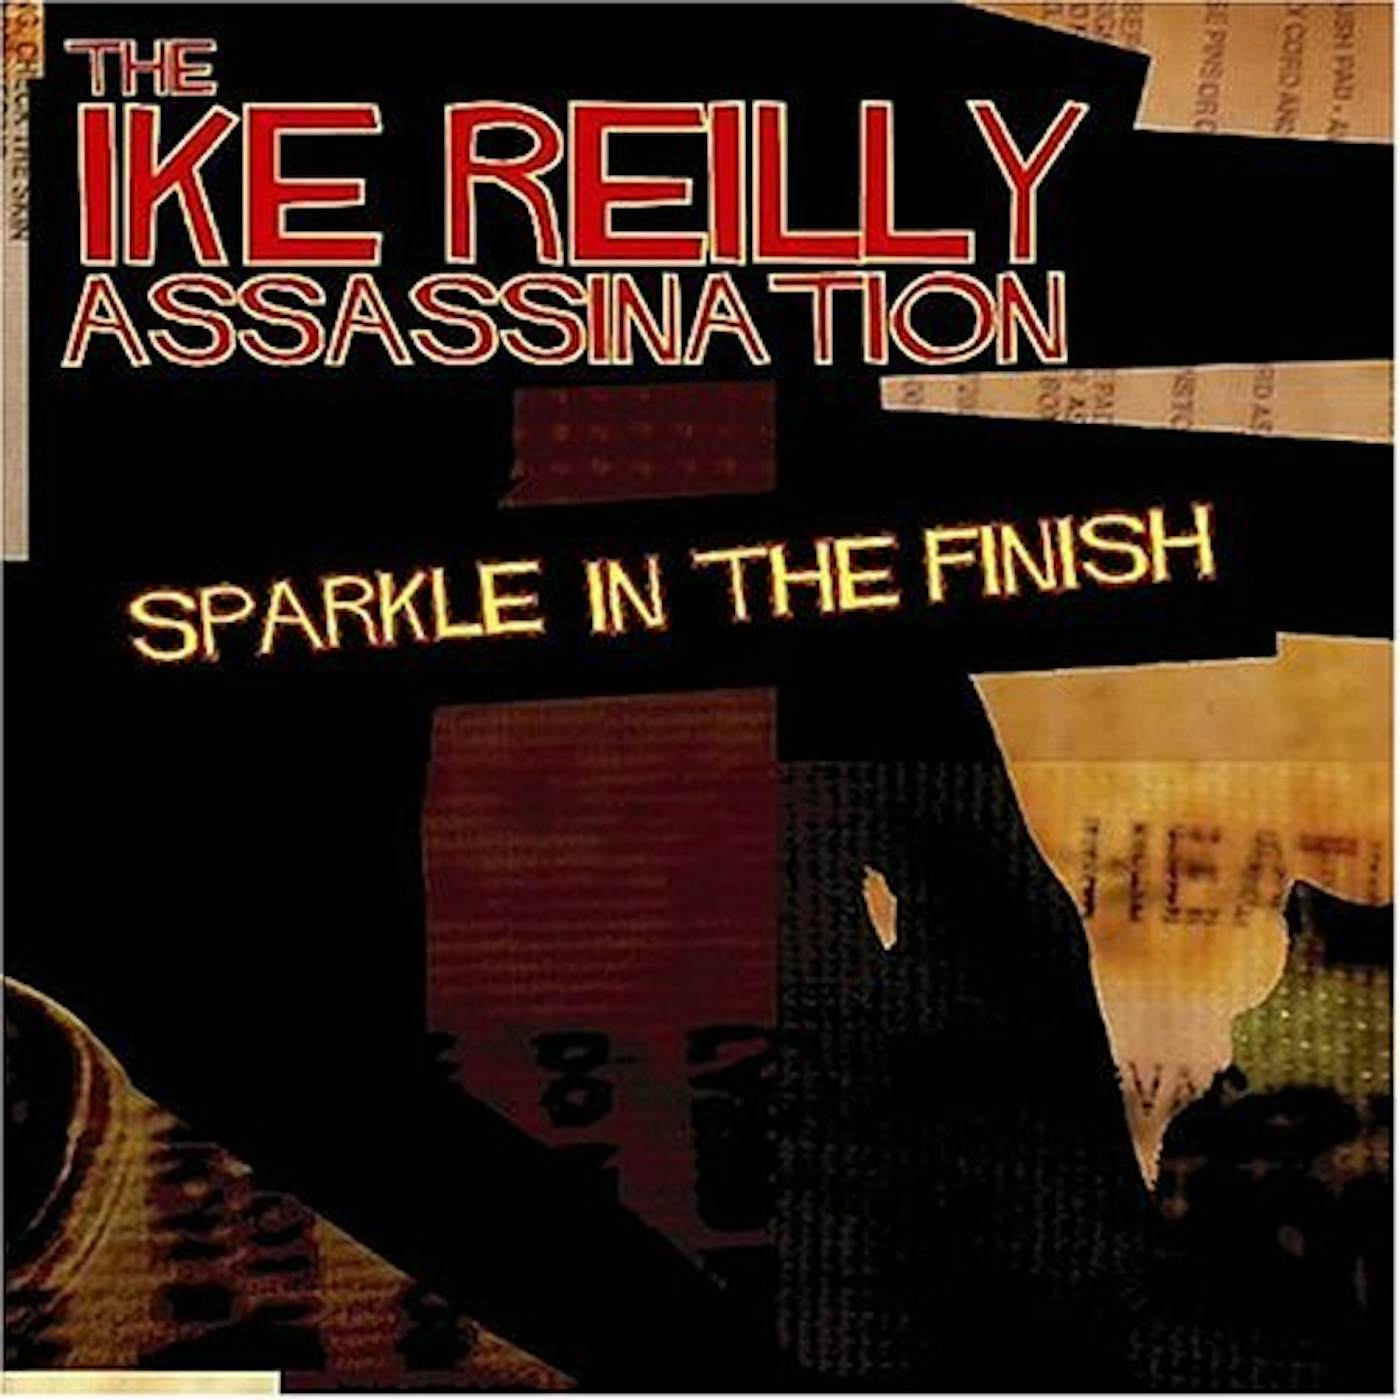 Ike Reilly SPARKLE IN THE FINISH CD